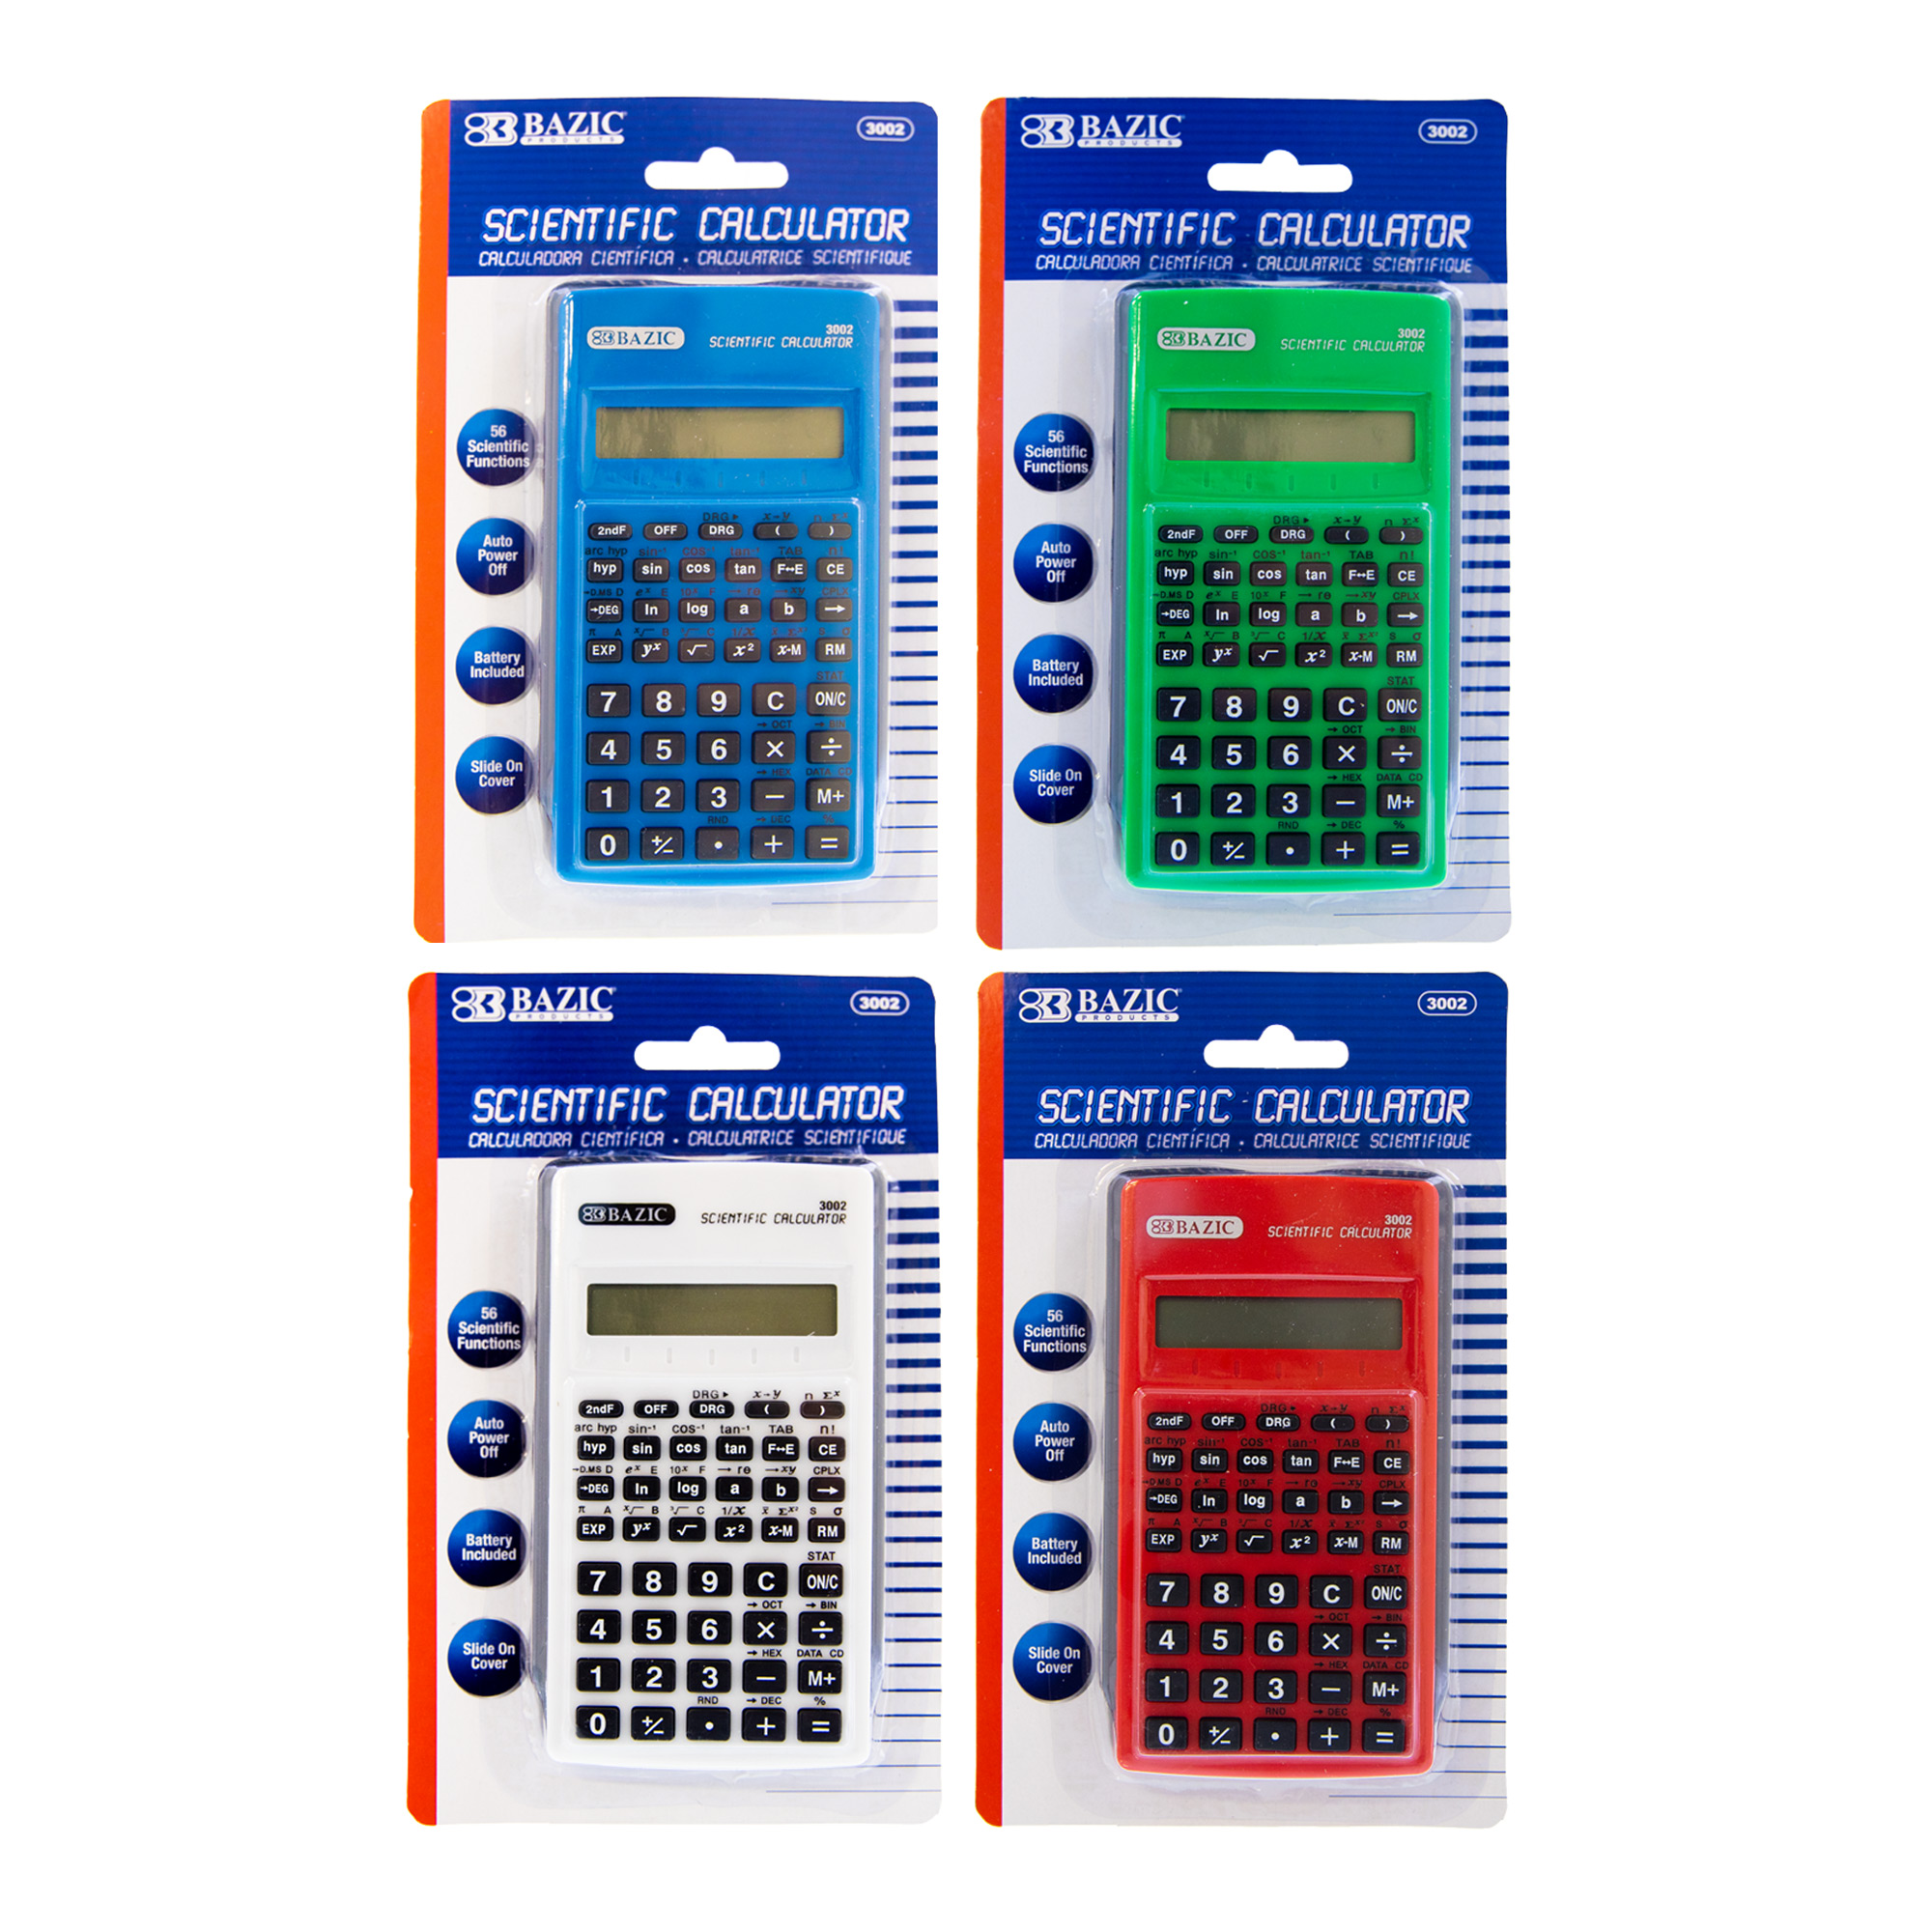 2-line Display Engineering Calculator red for High School Students College Students and Professionals Scientific Calculator 